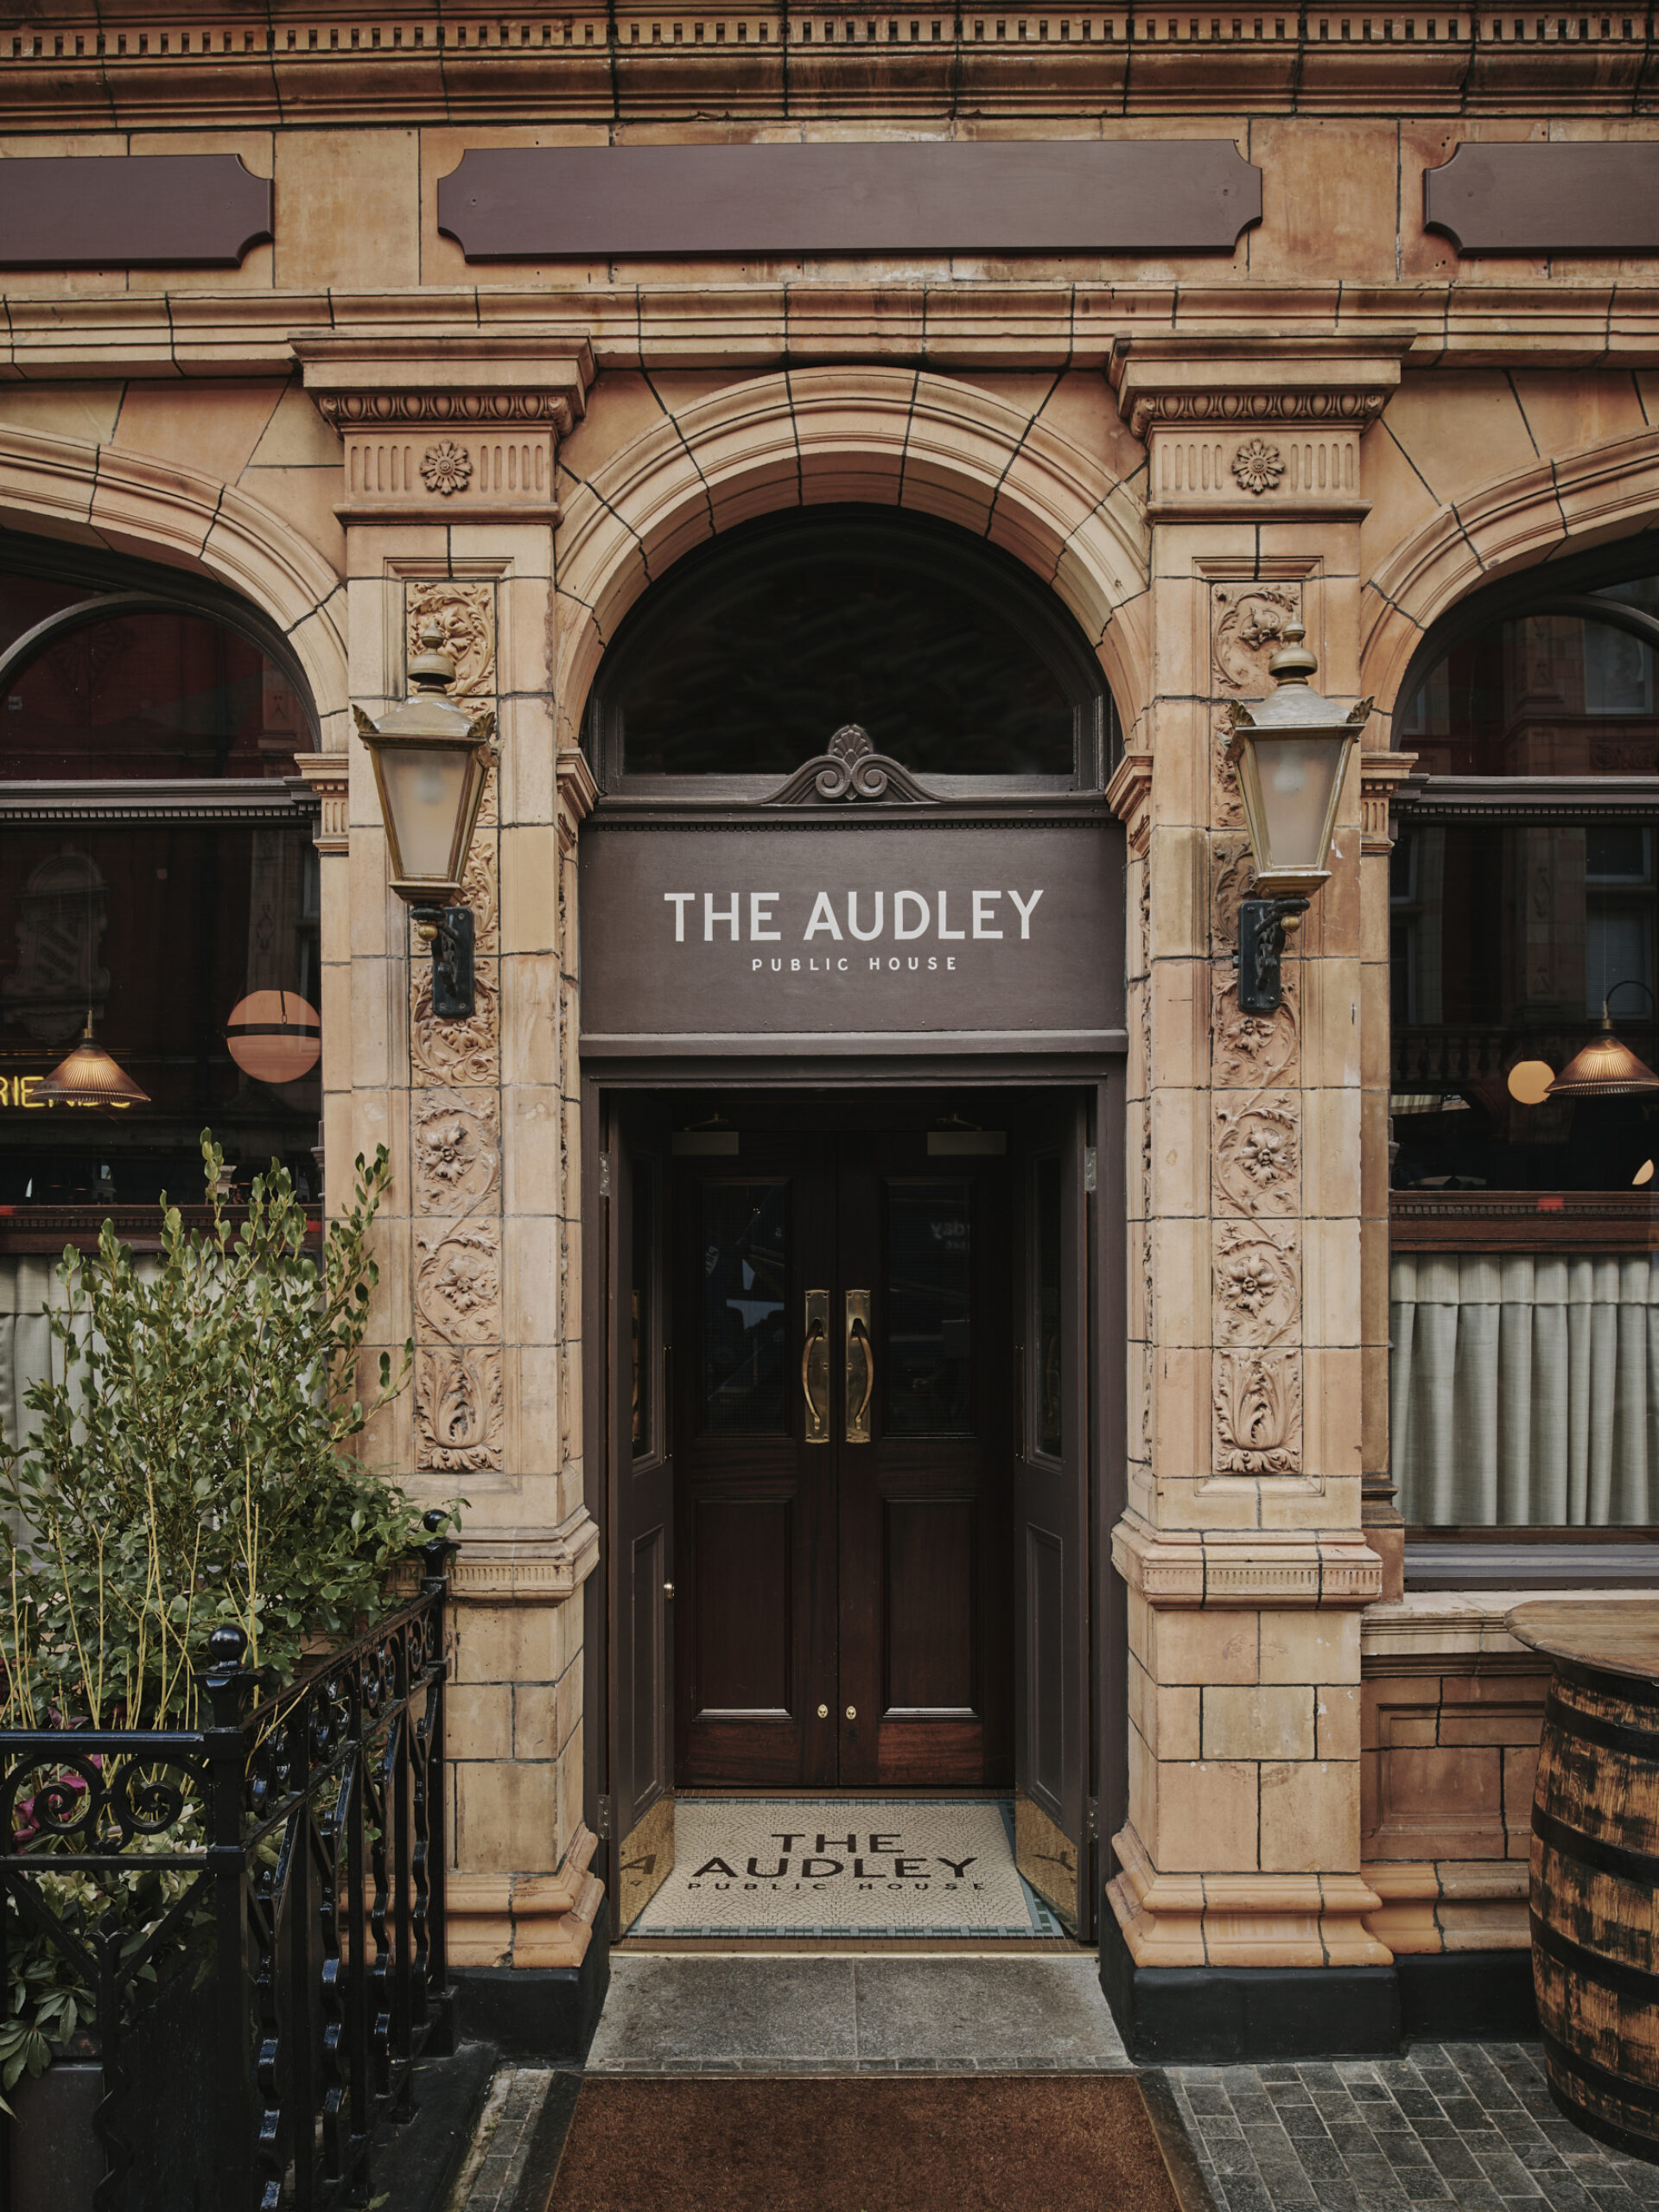 00 The Audley thumbnail image